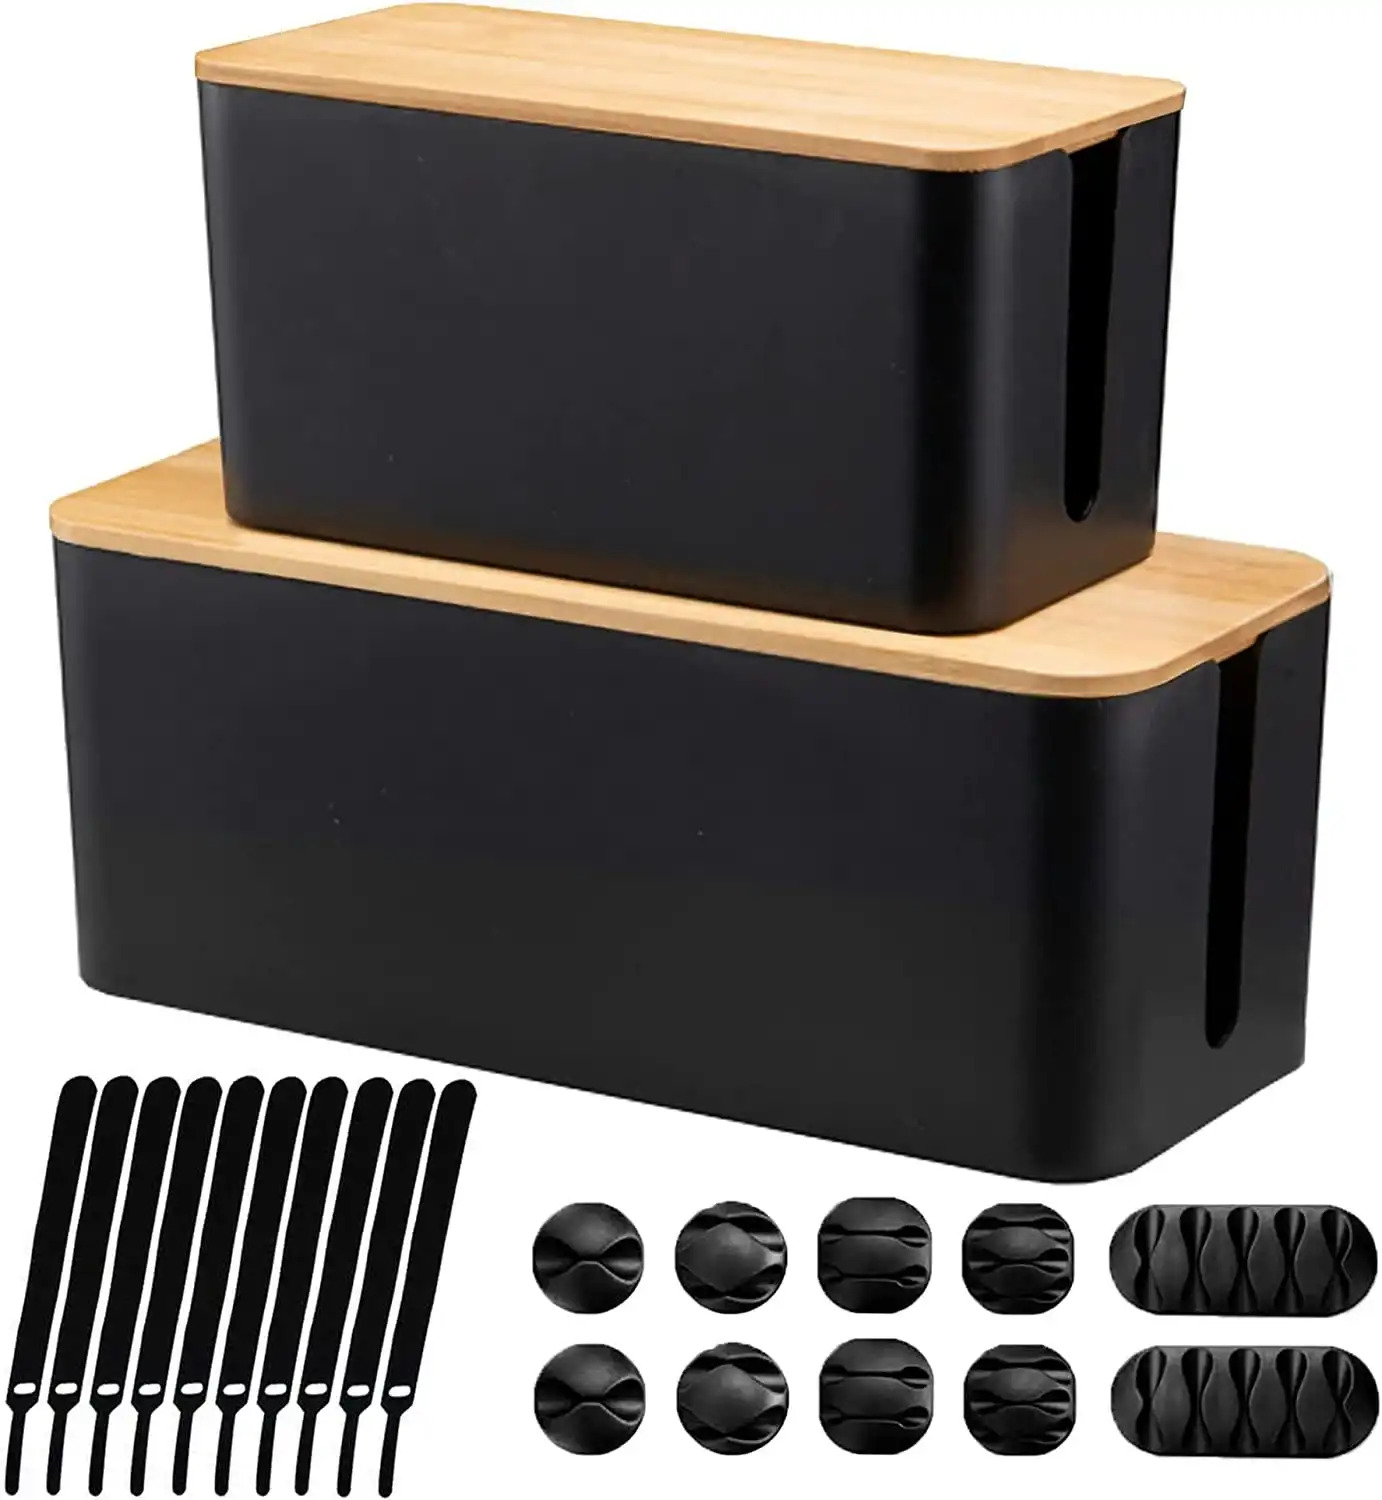 Set of 2 Cable Management Box to Hide TV Computer Wires, Organize Desk Cords, USB Hub Power Strips